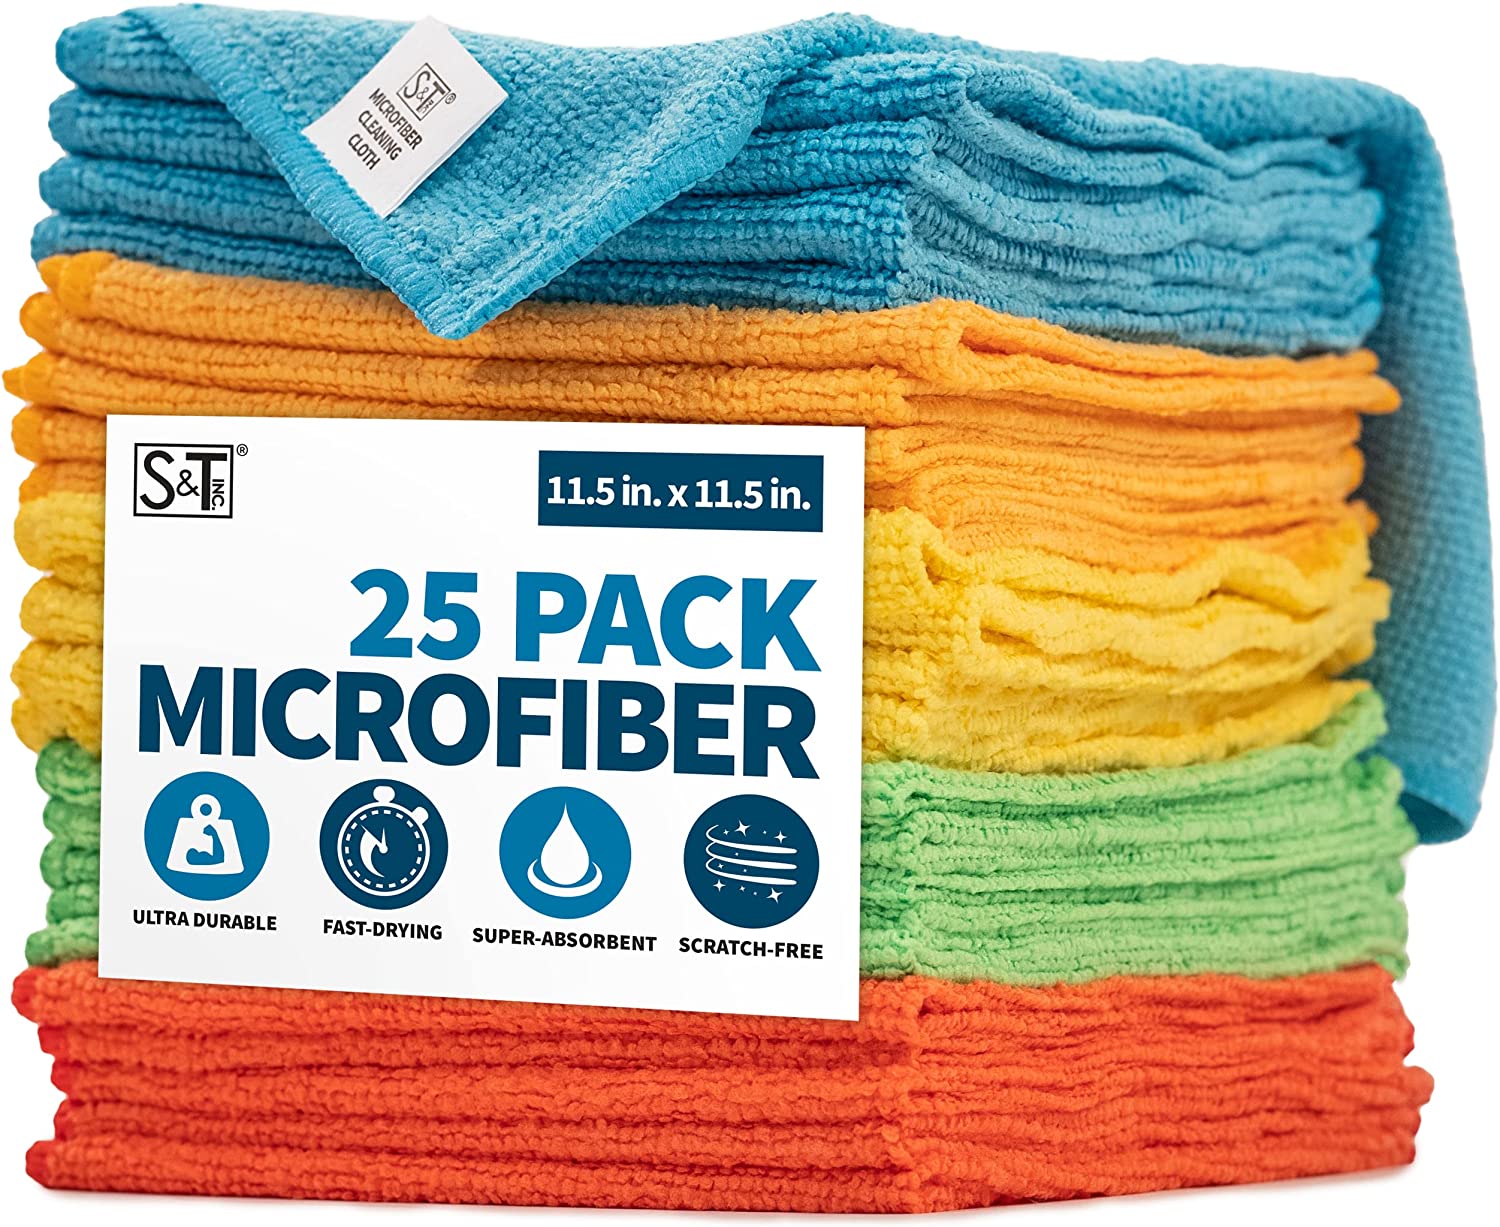 https://www.dontwasteyourmoney.com/wp-content/uploads/2022/11/st-inc-fast-drying-microfiber-cleaning-cloths-25-pack-microfiber-cleaning-cloth.jpg